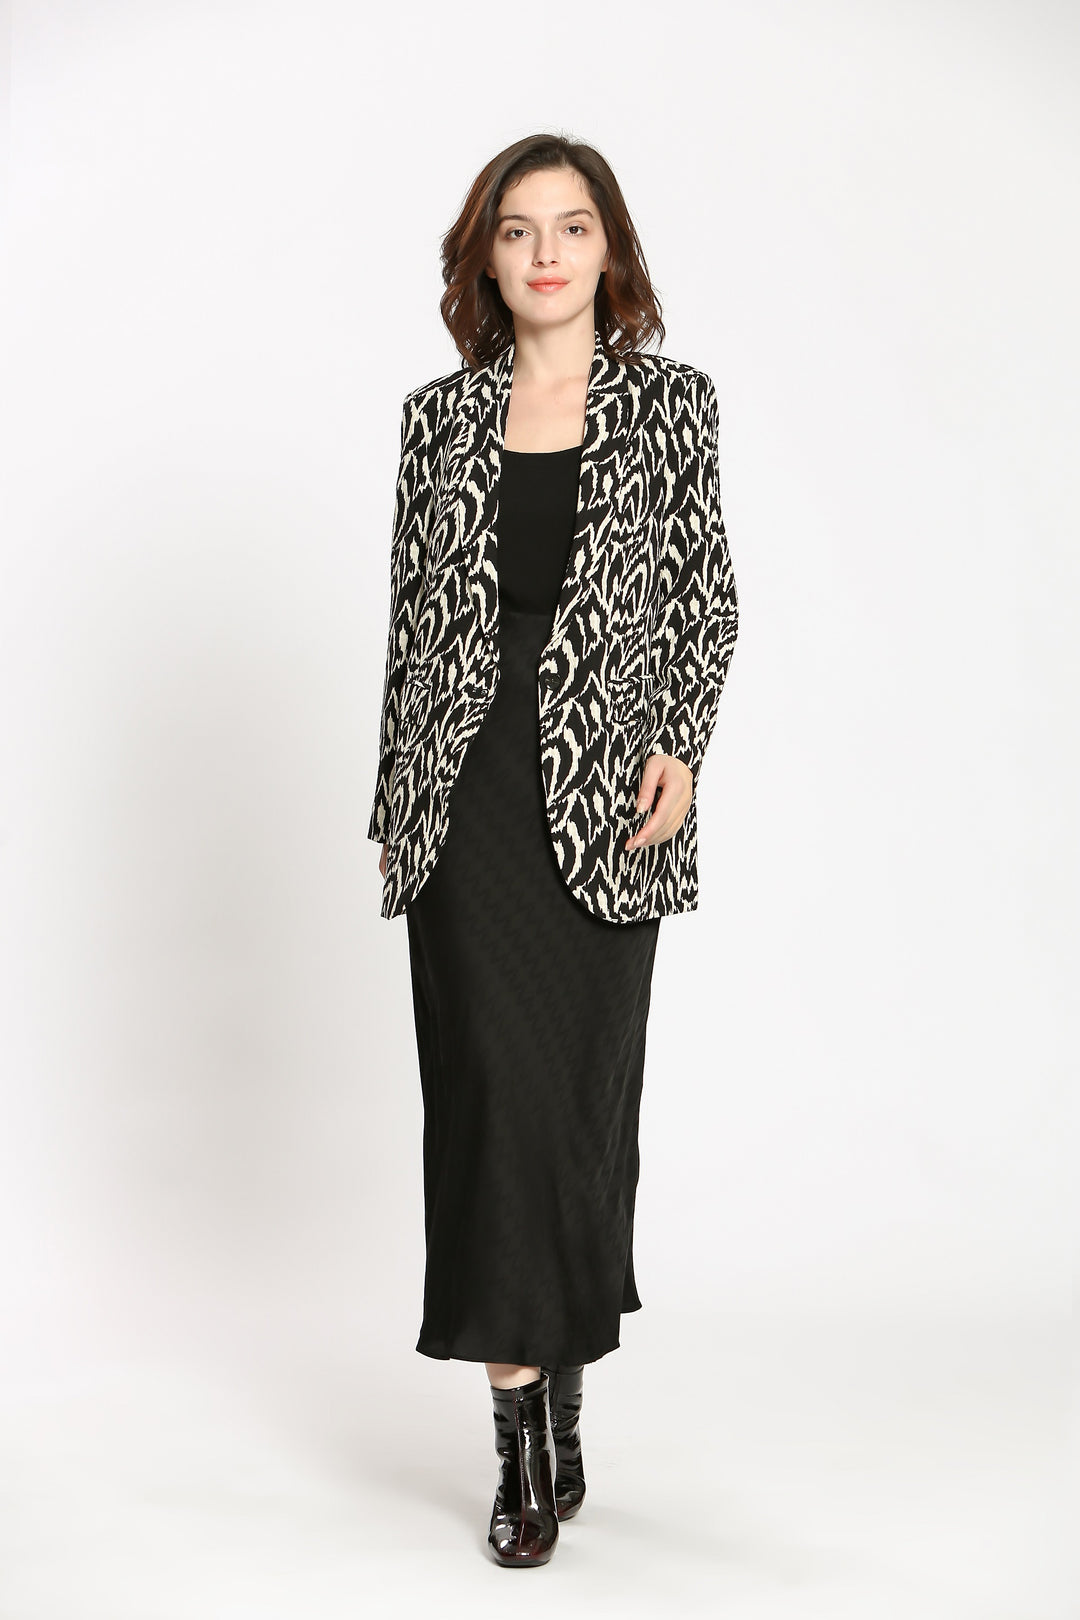 ABSTRACT PATTERN JACKET - BLACK - Kingfisher Road - Online Boutique